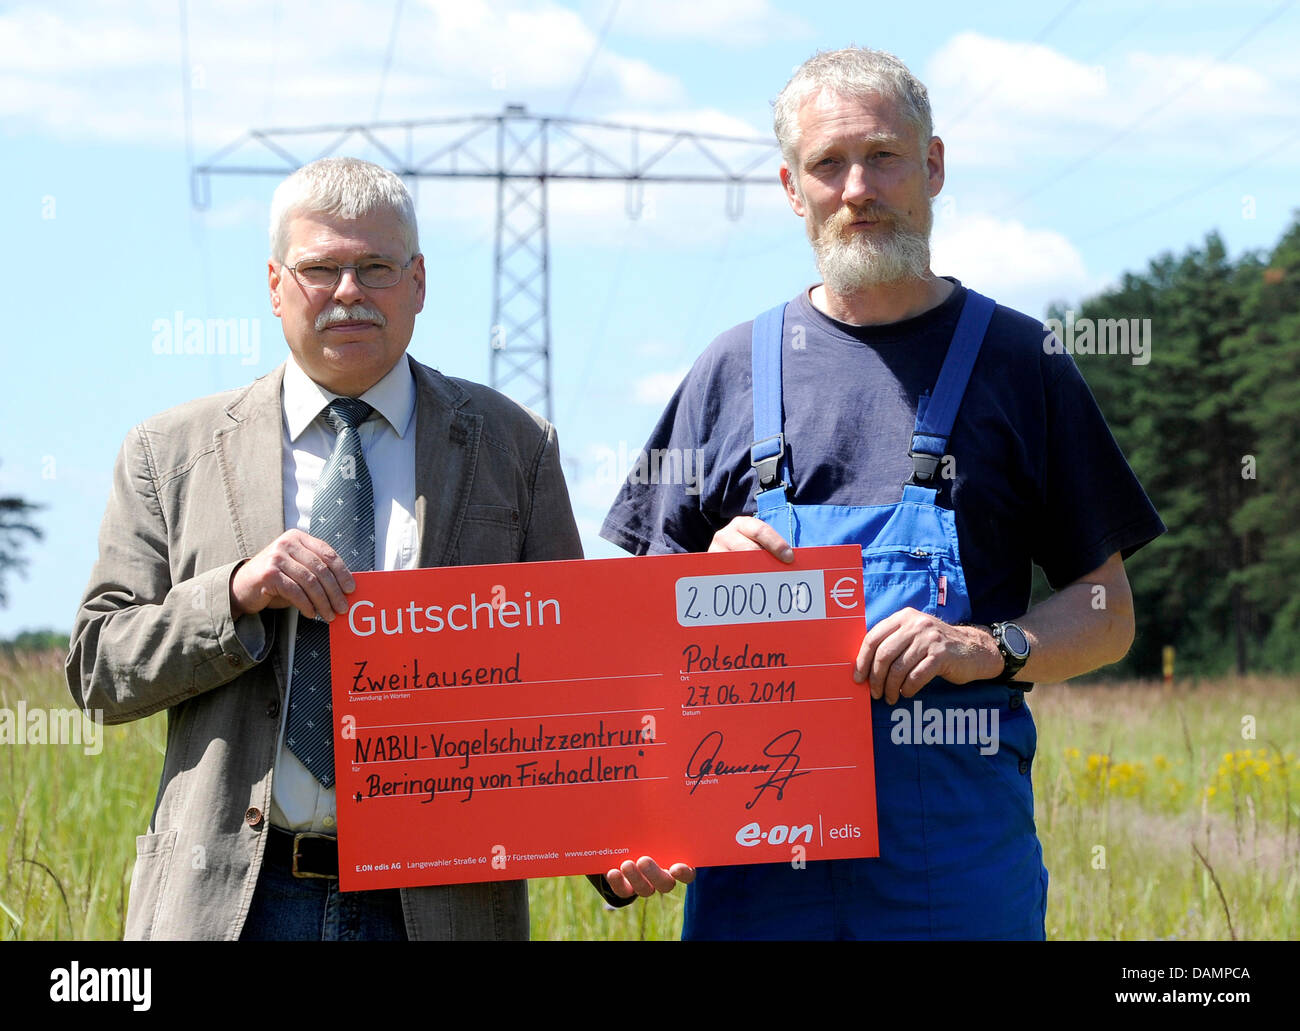 Joachim Baumgart (L) from E.ON edis power company presents Paul Soemmer, director of the nature preservancy station Woblitz, a voucher for the Osprey ringing project near Fuerstenberg, Germany, 27 June 2011. Around 200 young Ospreys are being ringed by the E.ON edis in close cooperation with the Environmental Agency of the State of Brandenburg, because the species was almost extinc Stock Photo